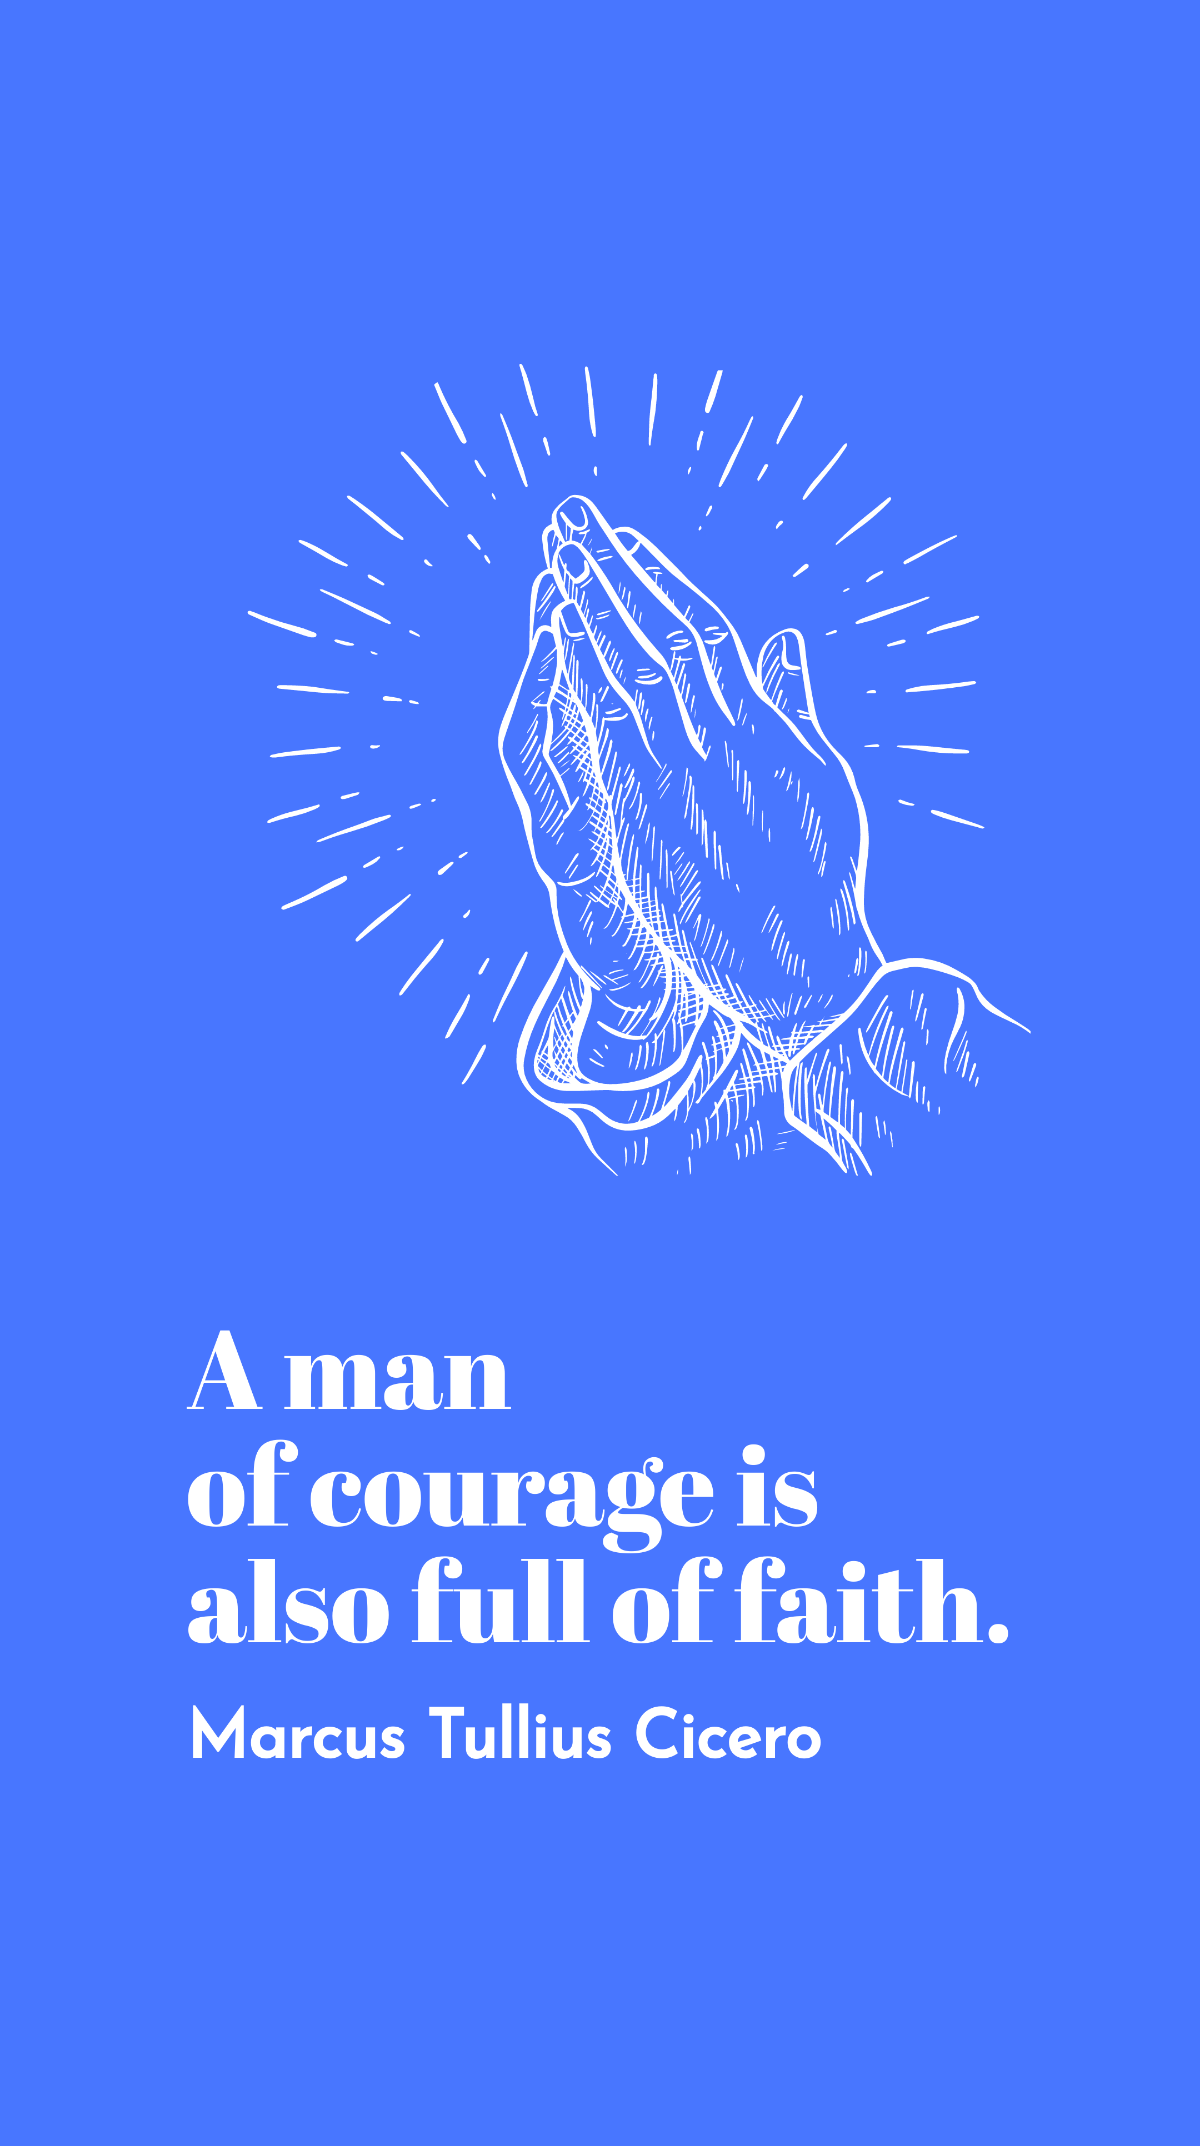 Marcus Tullius Cicero - A man of courage is also full of faith. Template